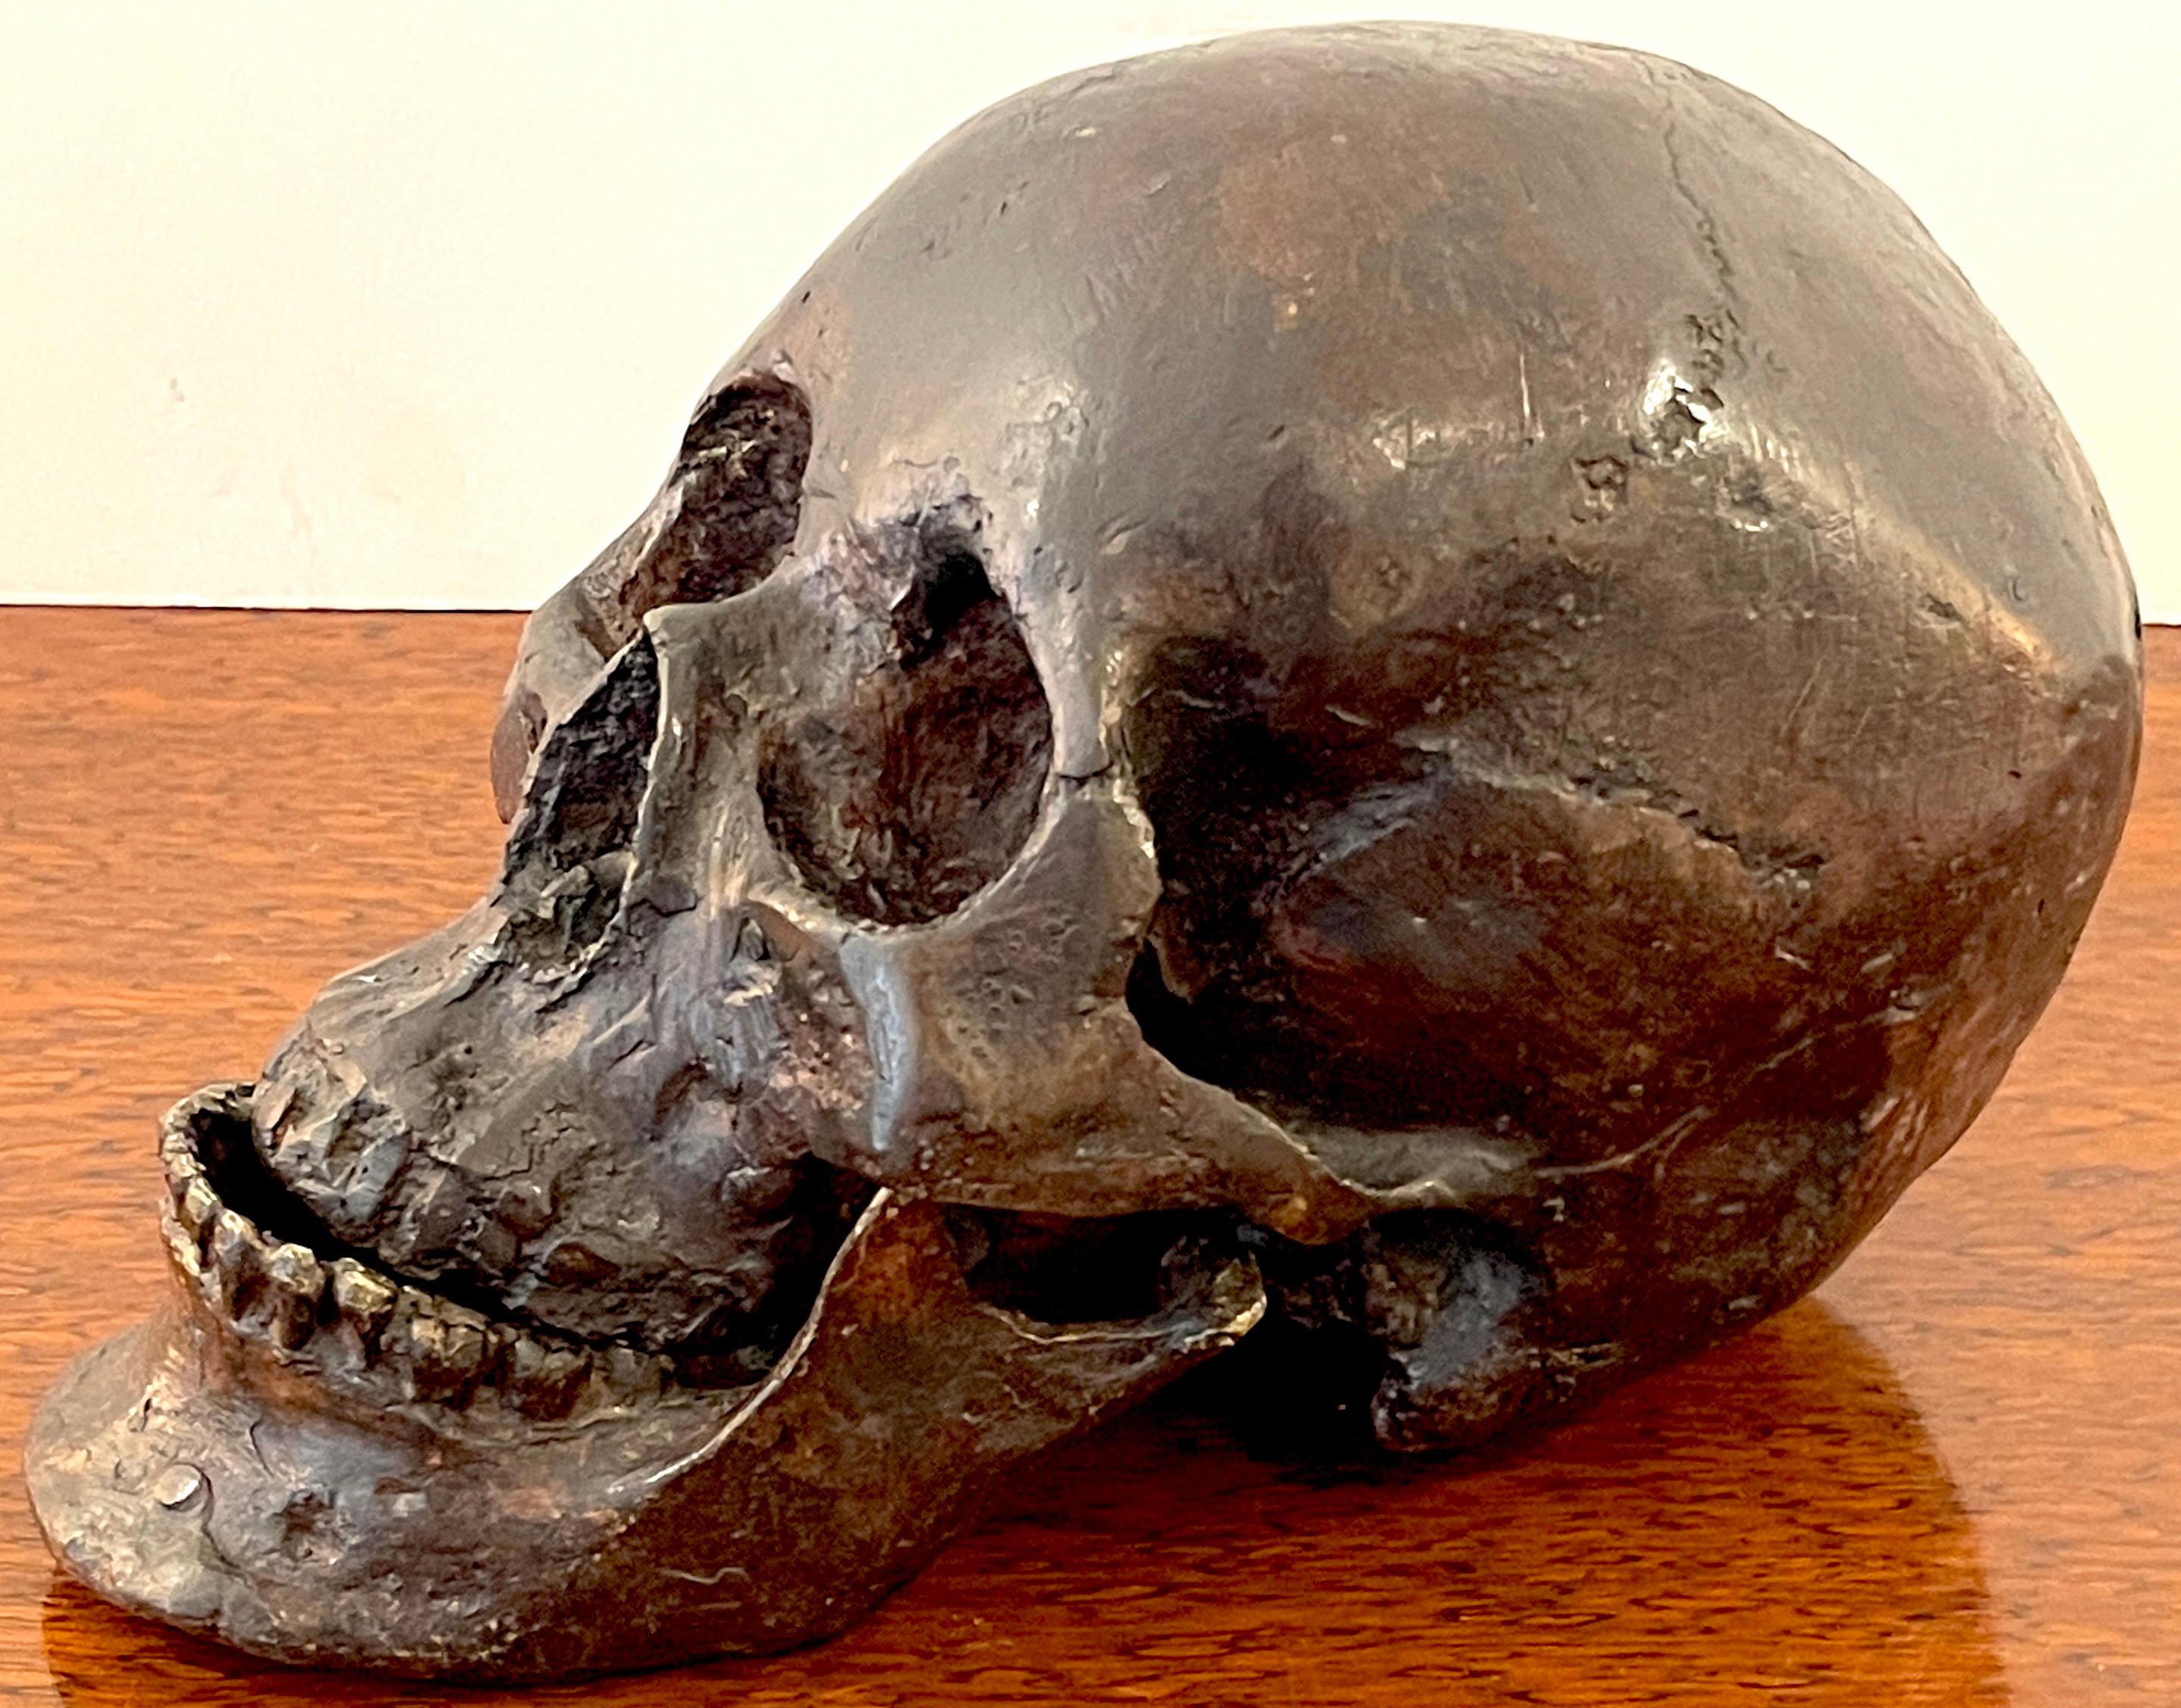 Life Cast Bronze Model/Sculpture of a Human Skull
Signed and copyrighted Indistinctly, possibly by Maxilla and Mandible Ltd. New York

Realistically cast and modled, in two parts with upper and lower jaws.
This skull vanity (or vanitas) is a